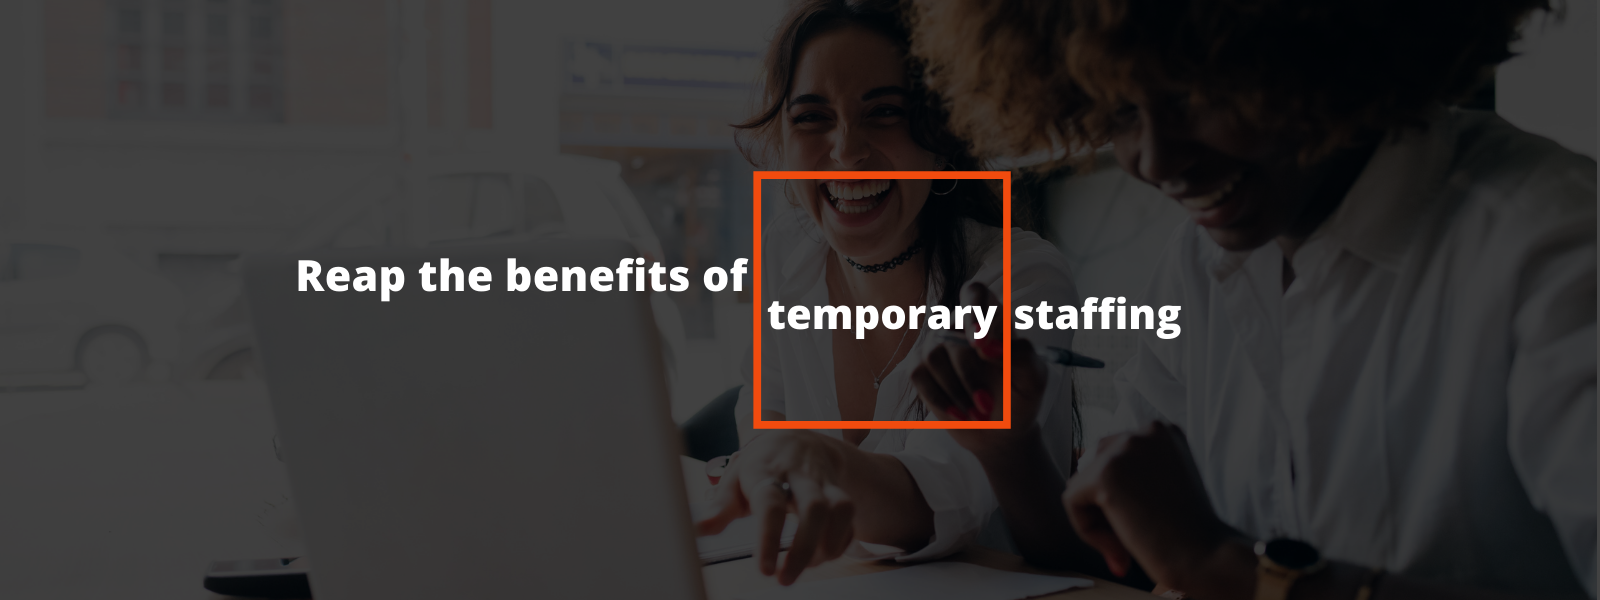 Reap the Benefits of Temporary Staffing News Banner Image